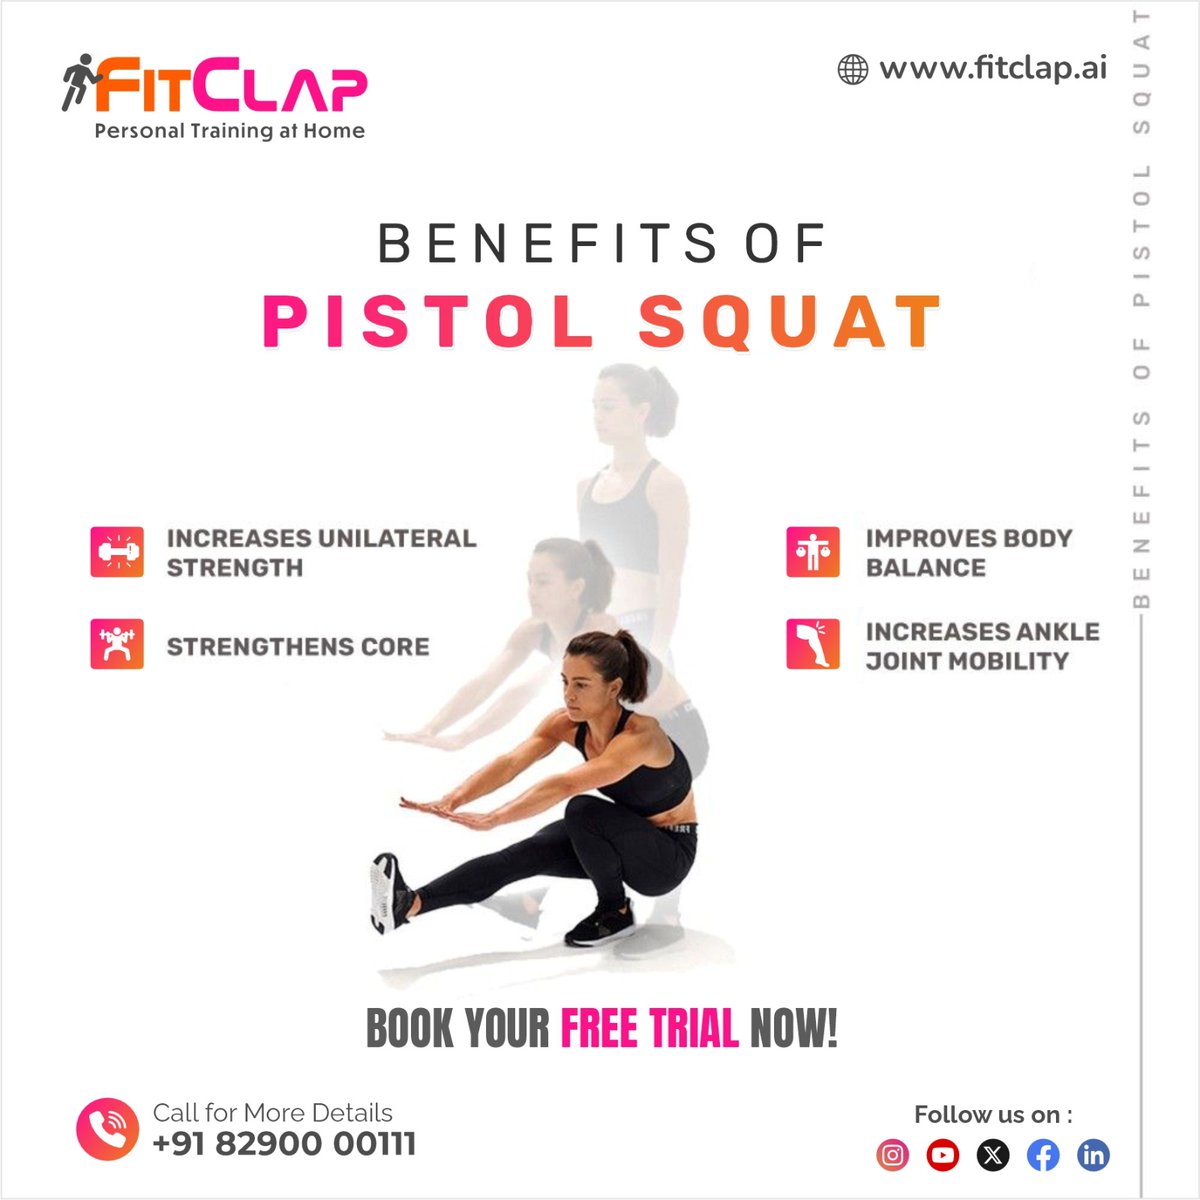 Transform your leg day routine with Pisto squats! Discover how FitClap can help you unlock the full potential of this powerful exercise. 

Visit - fitclap.ai
Dial 📞 +91 82900 00111

#FitClap #PistoSquats #HomeWorkout #HomeFitness #WorkoutAtHome #FreeTrial #squats